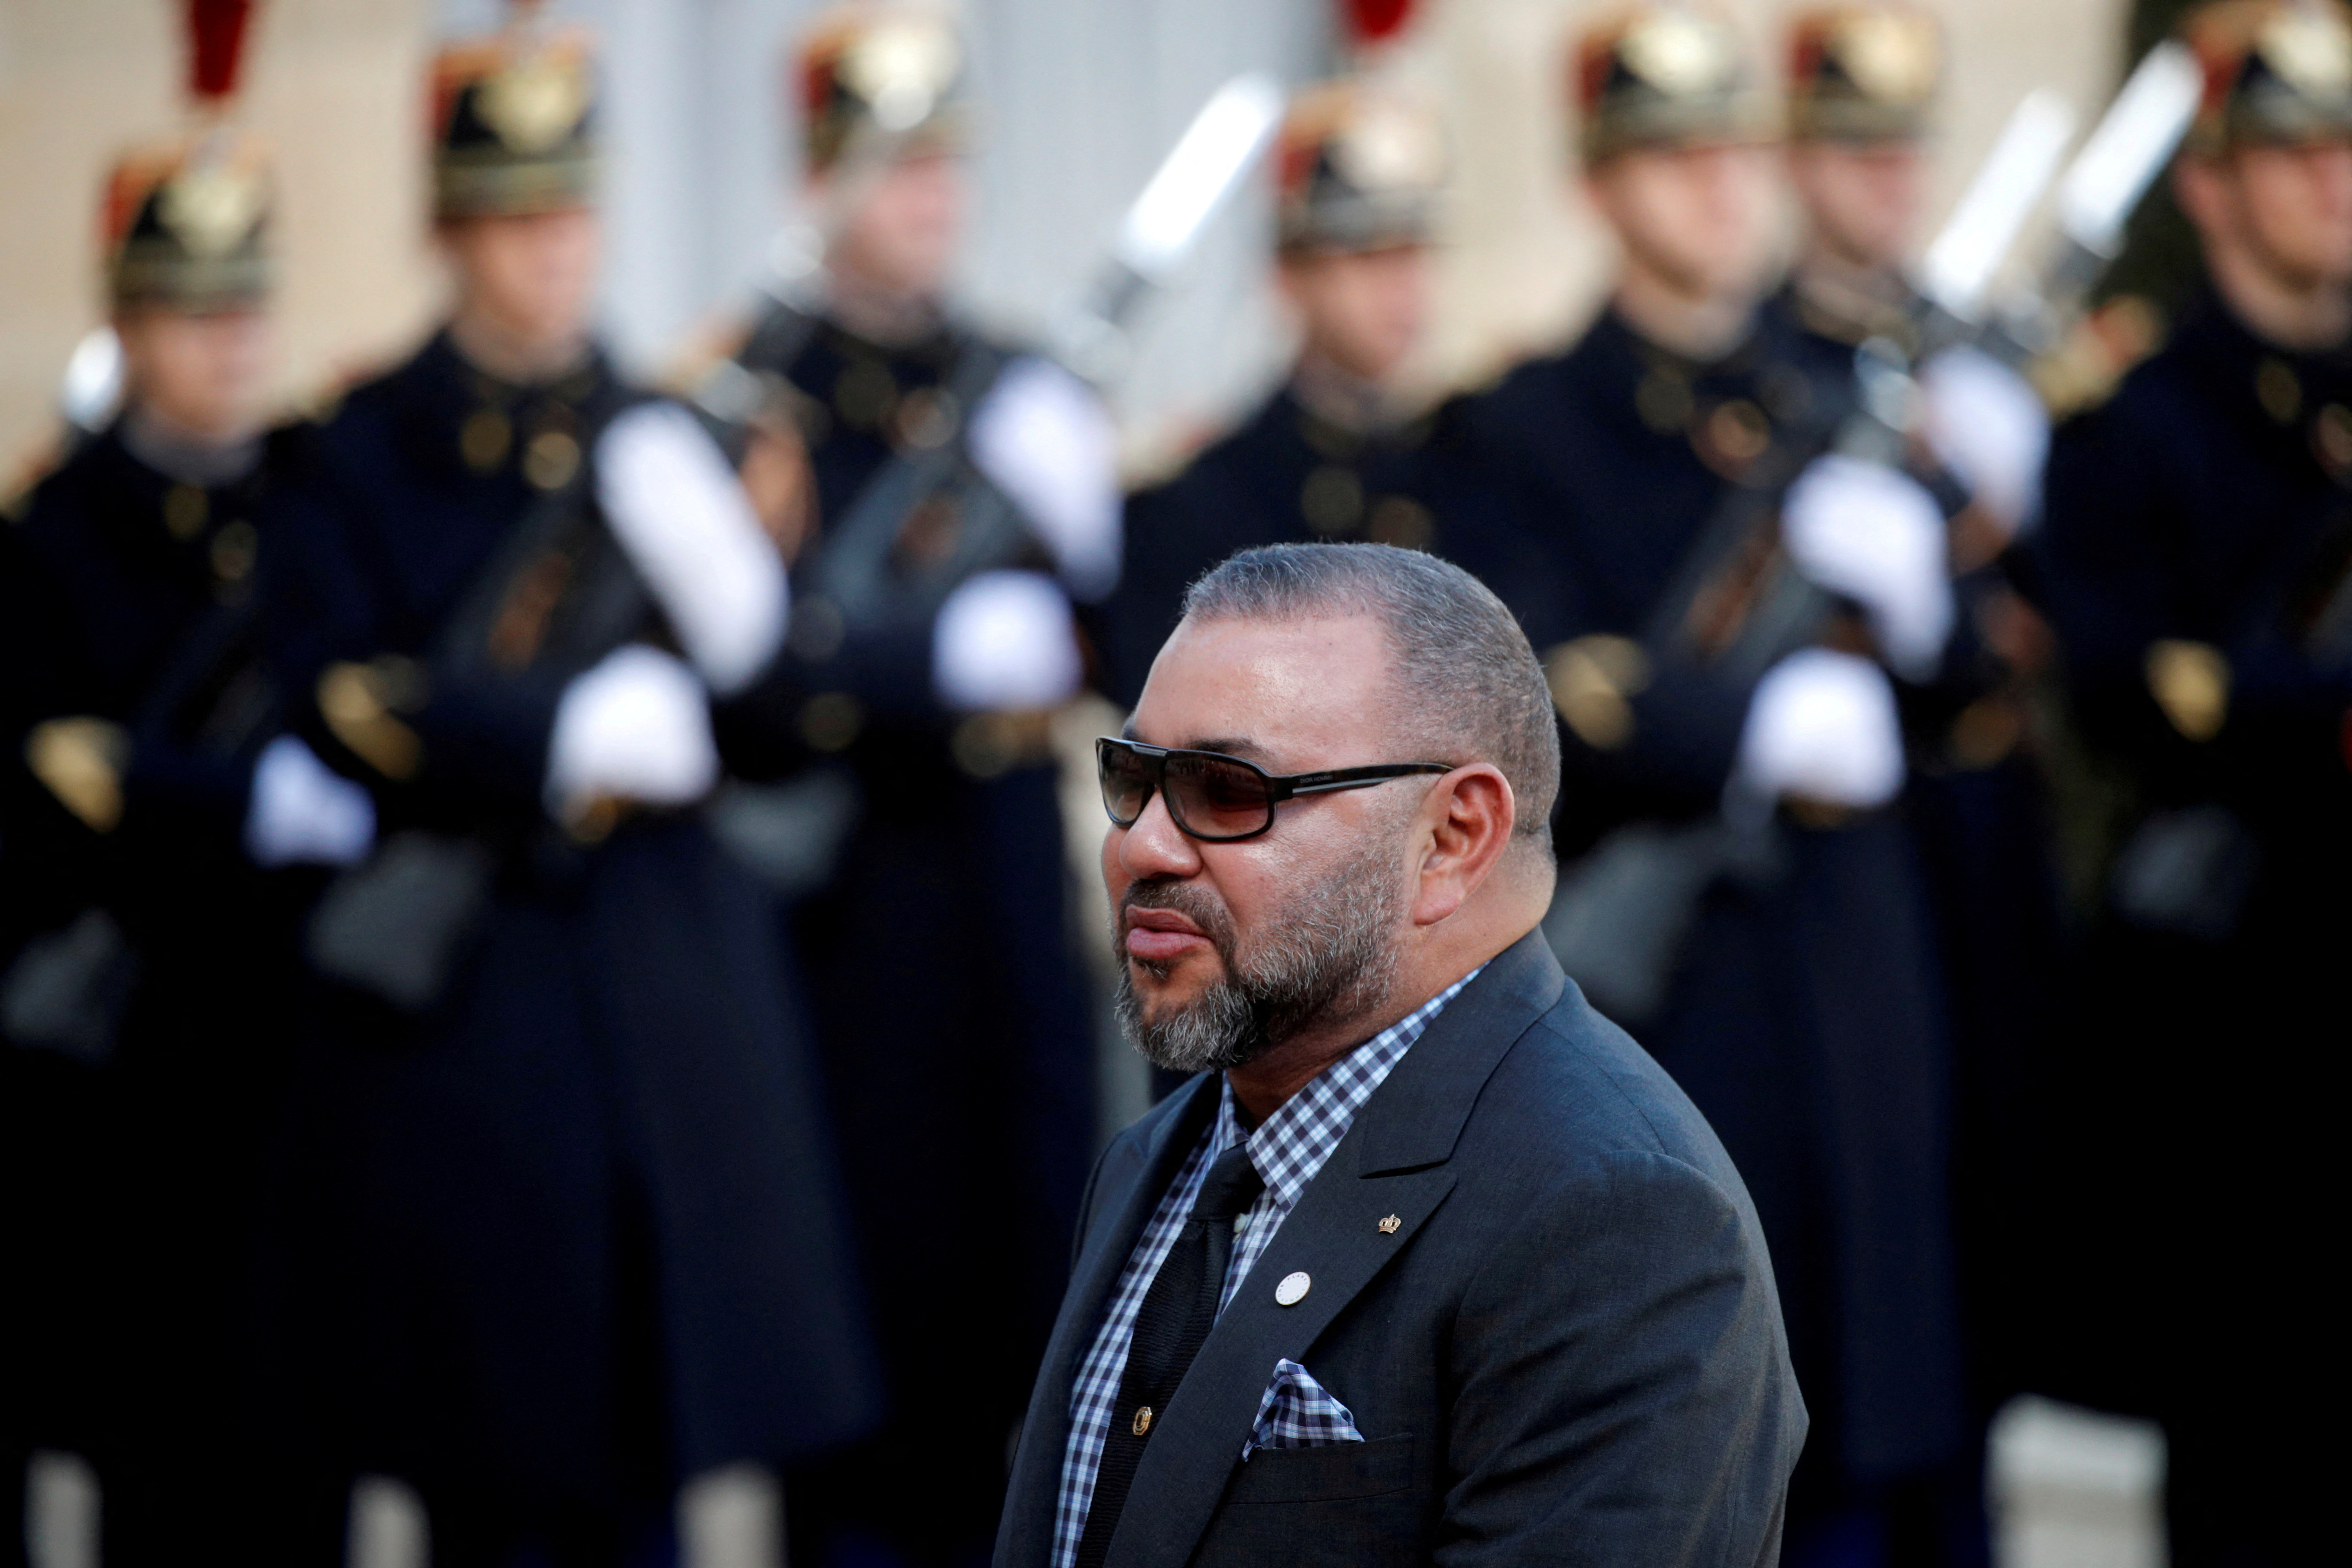 Morocco's King Mohammed VI arrives for a lunch at the Elysee Palace as part of the One Planet Summit in Paris